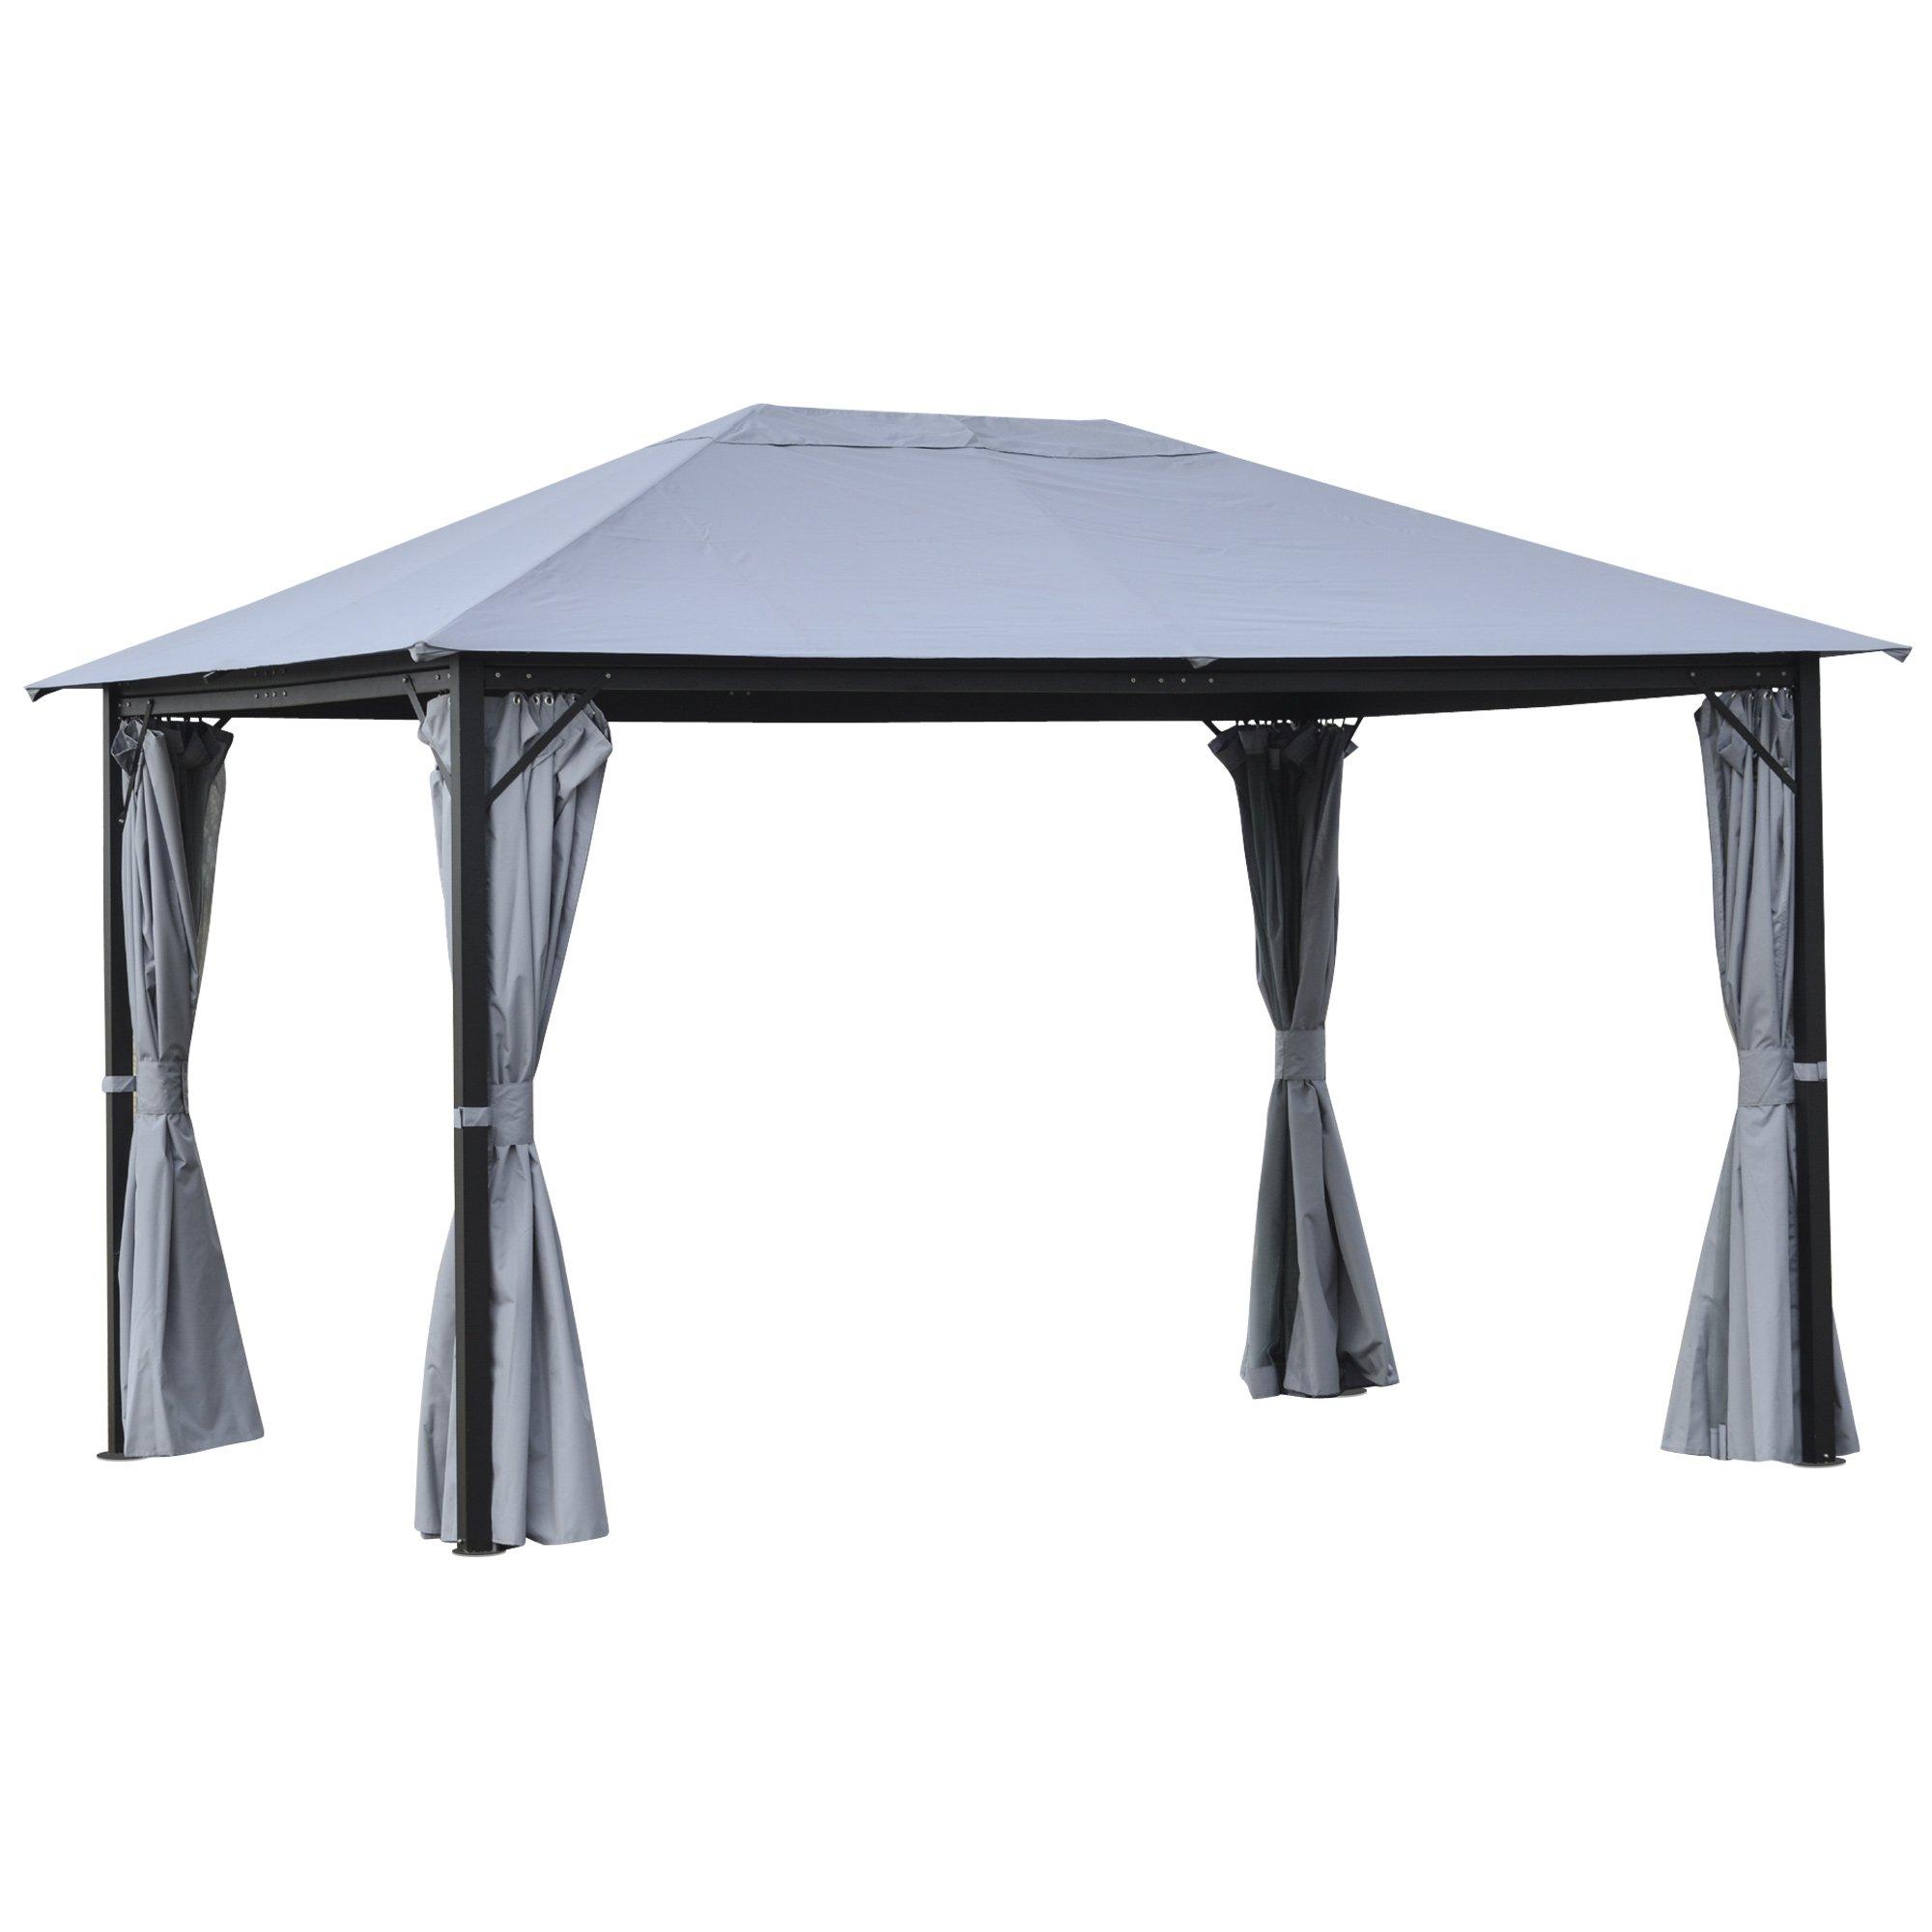 4 X 3Metre Outdoor Gazebo Canopy With Curtains Netting Sidewalls